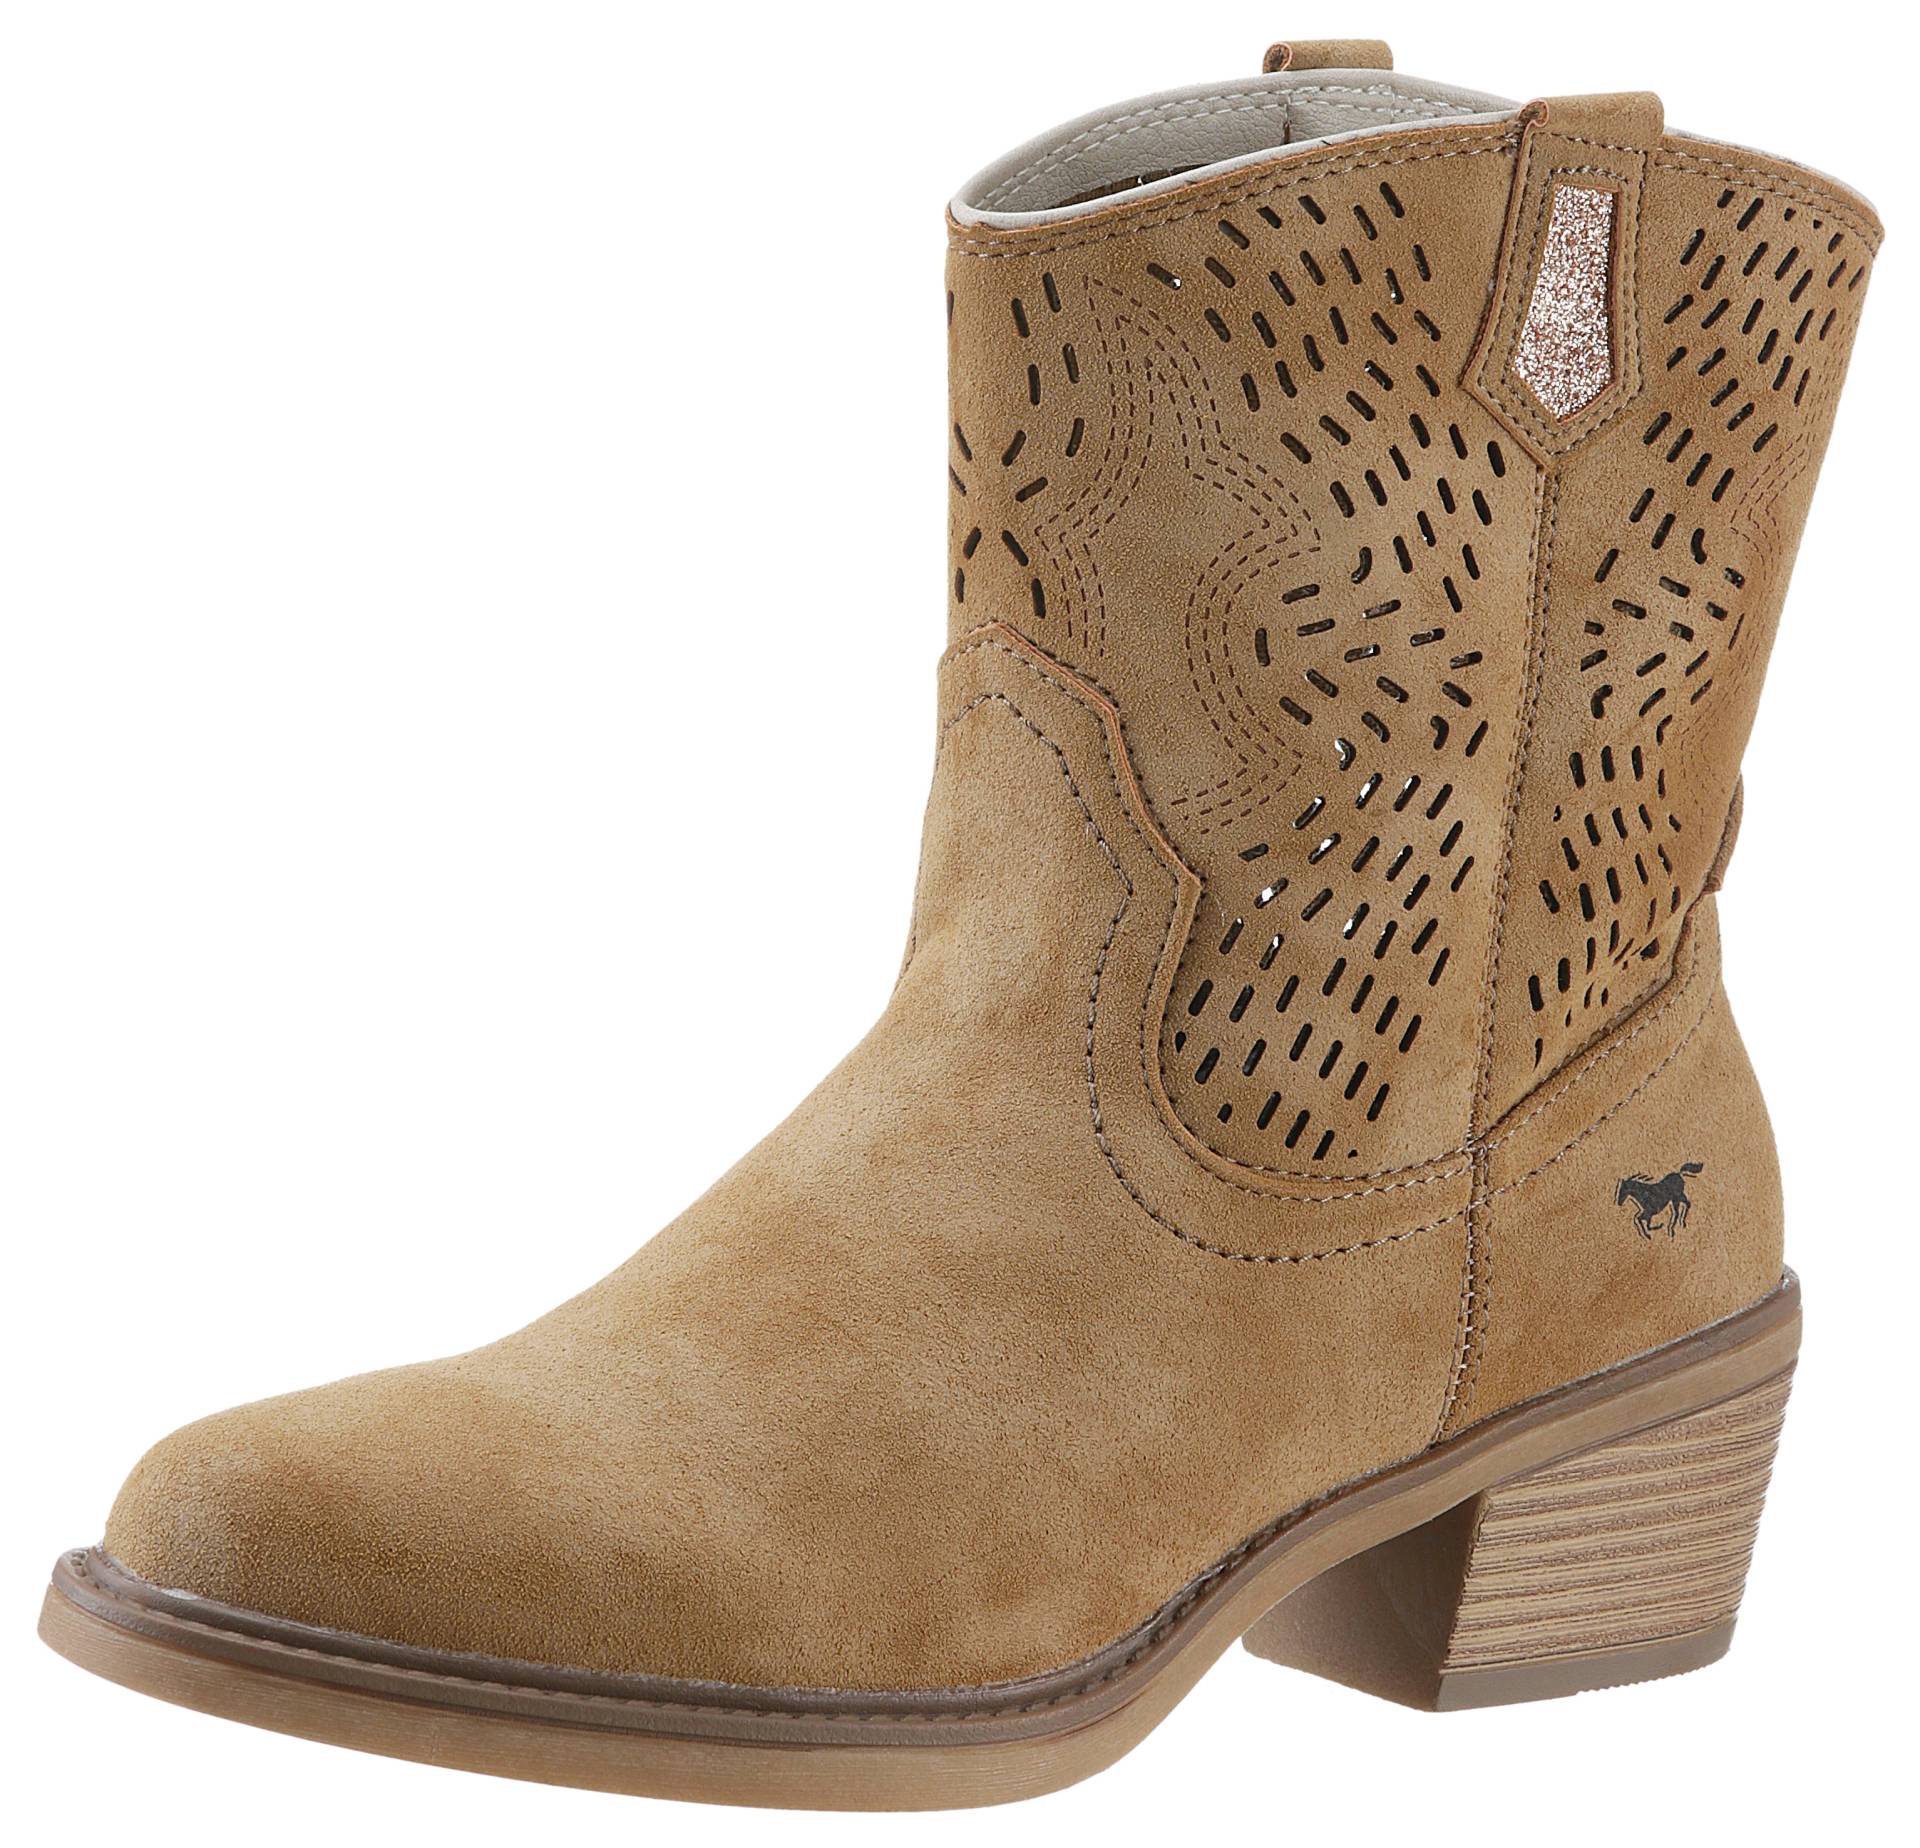 Mustang Shoes Westernstiefelette von mustang shoes